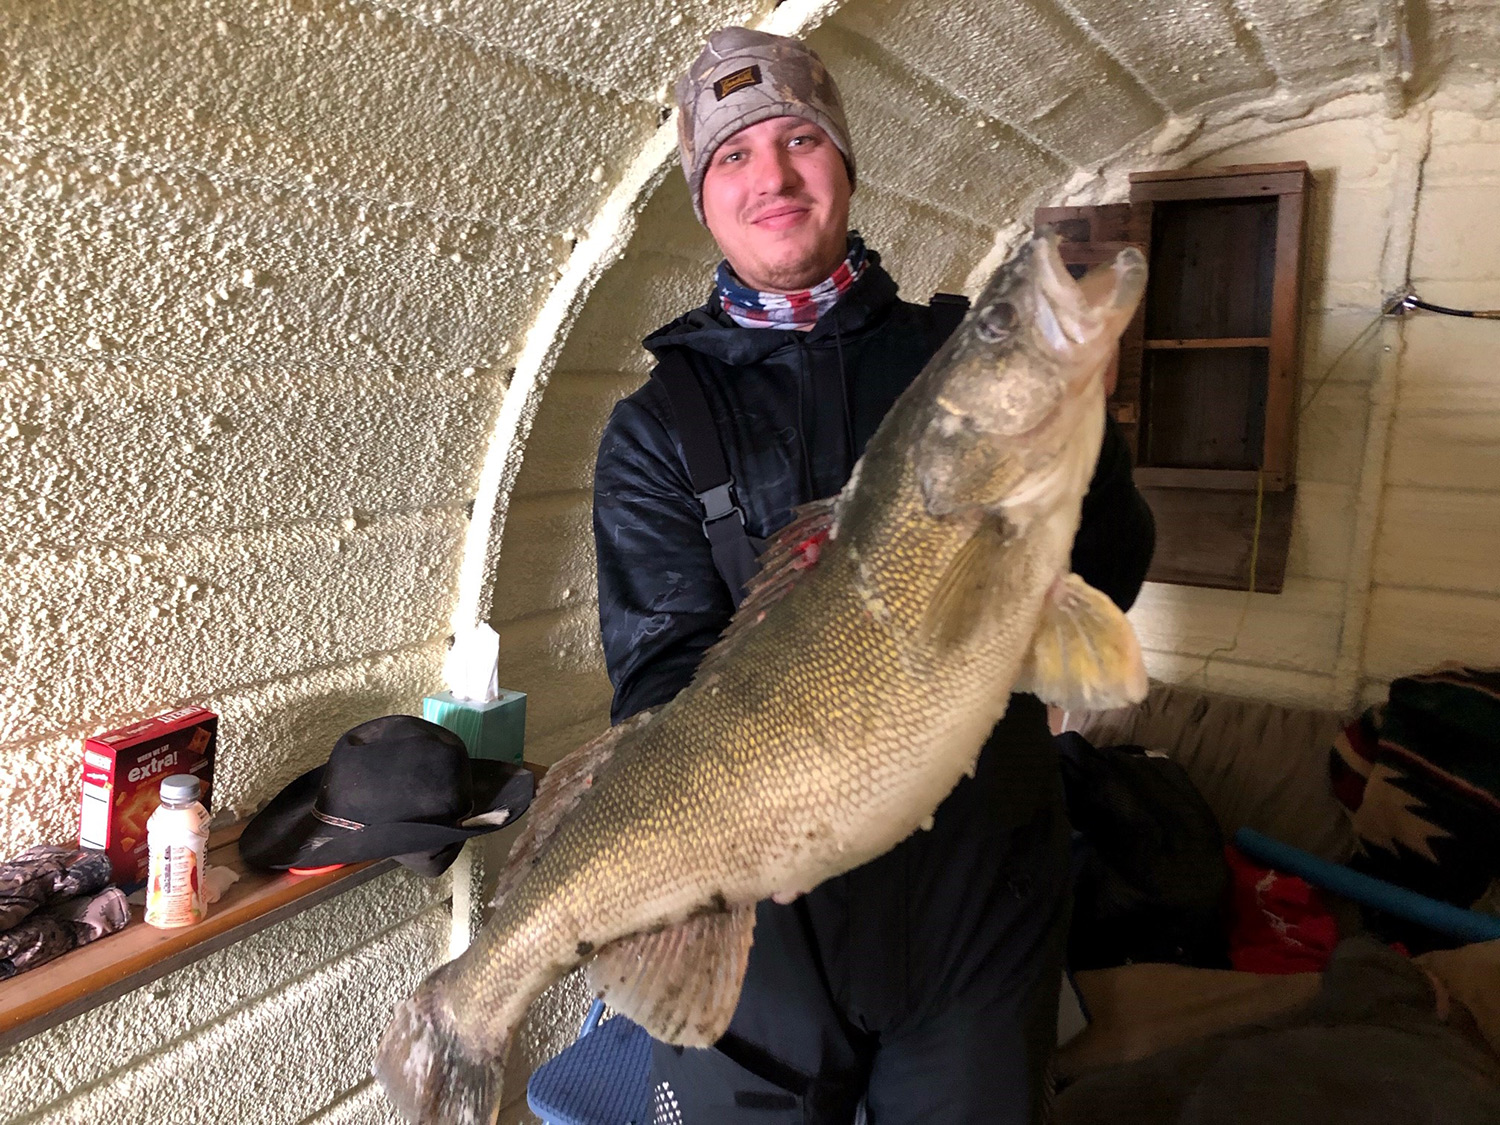 An angler holds up a large walleye.